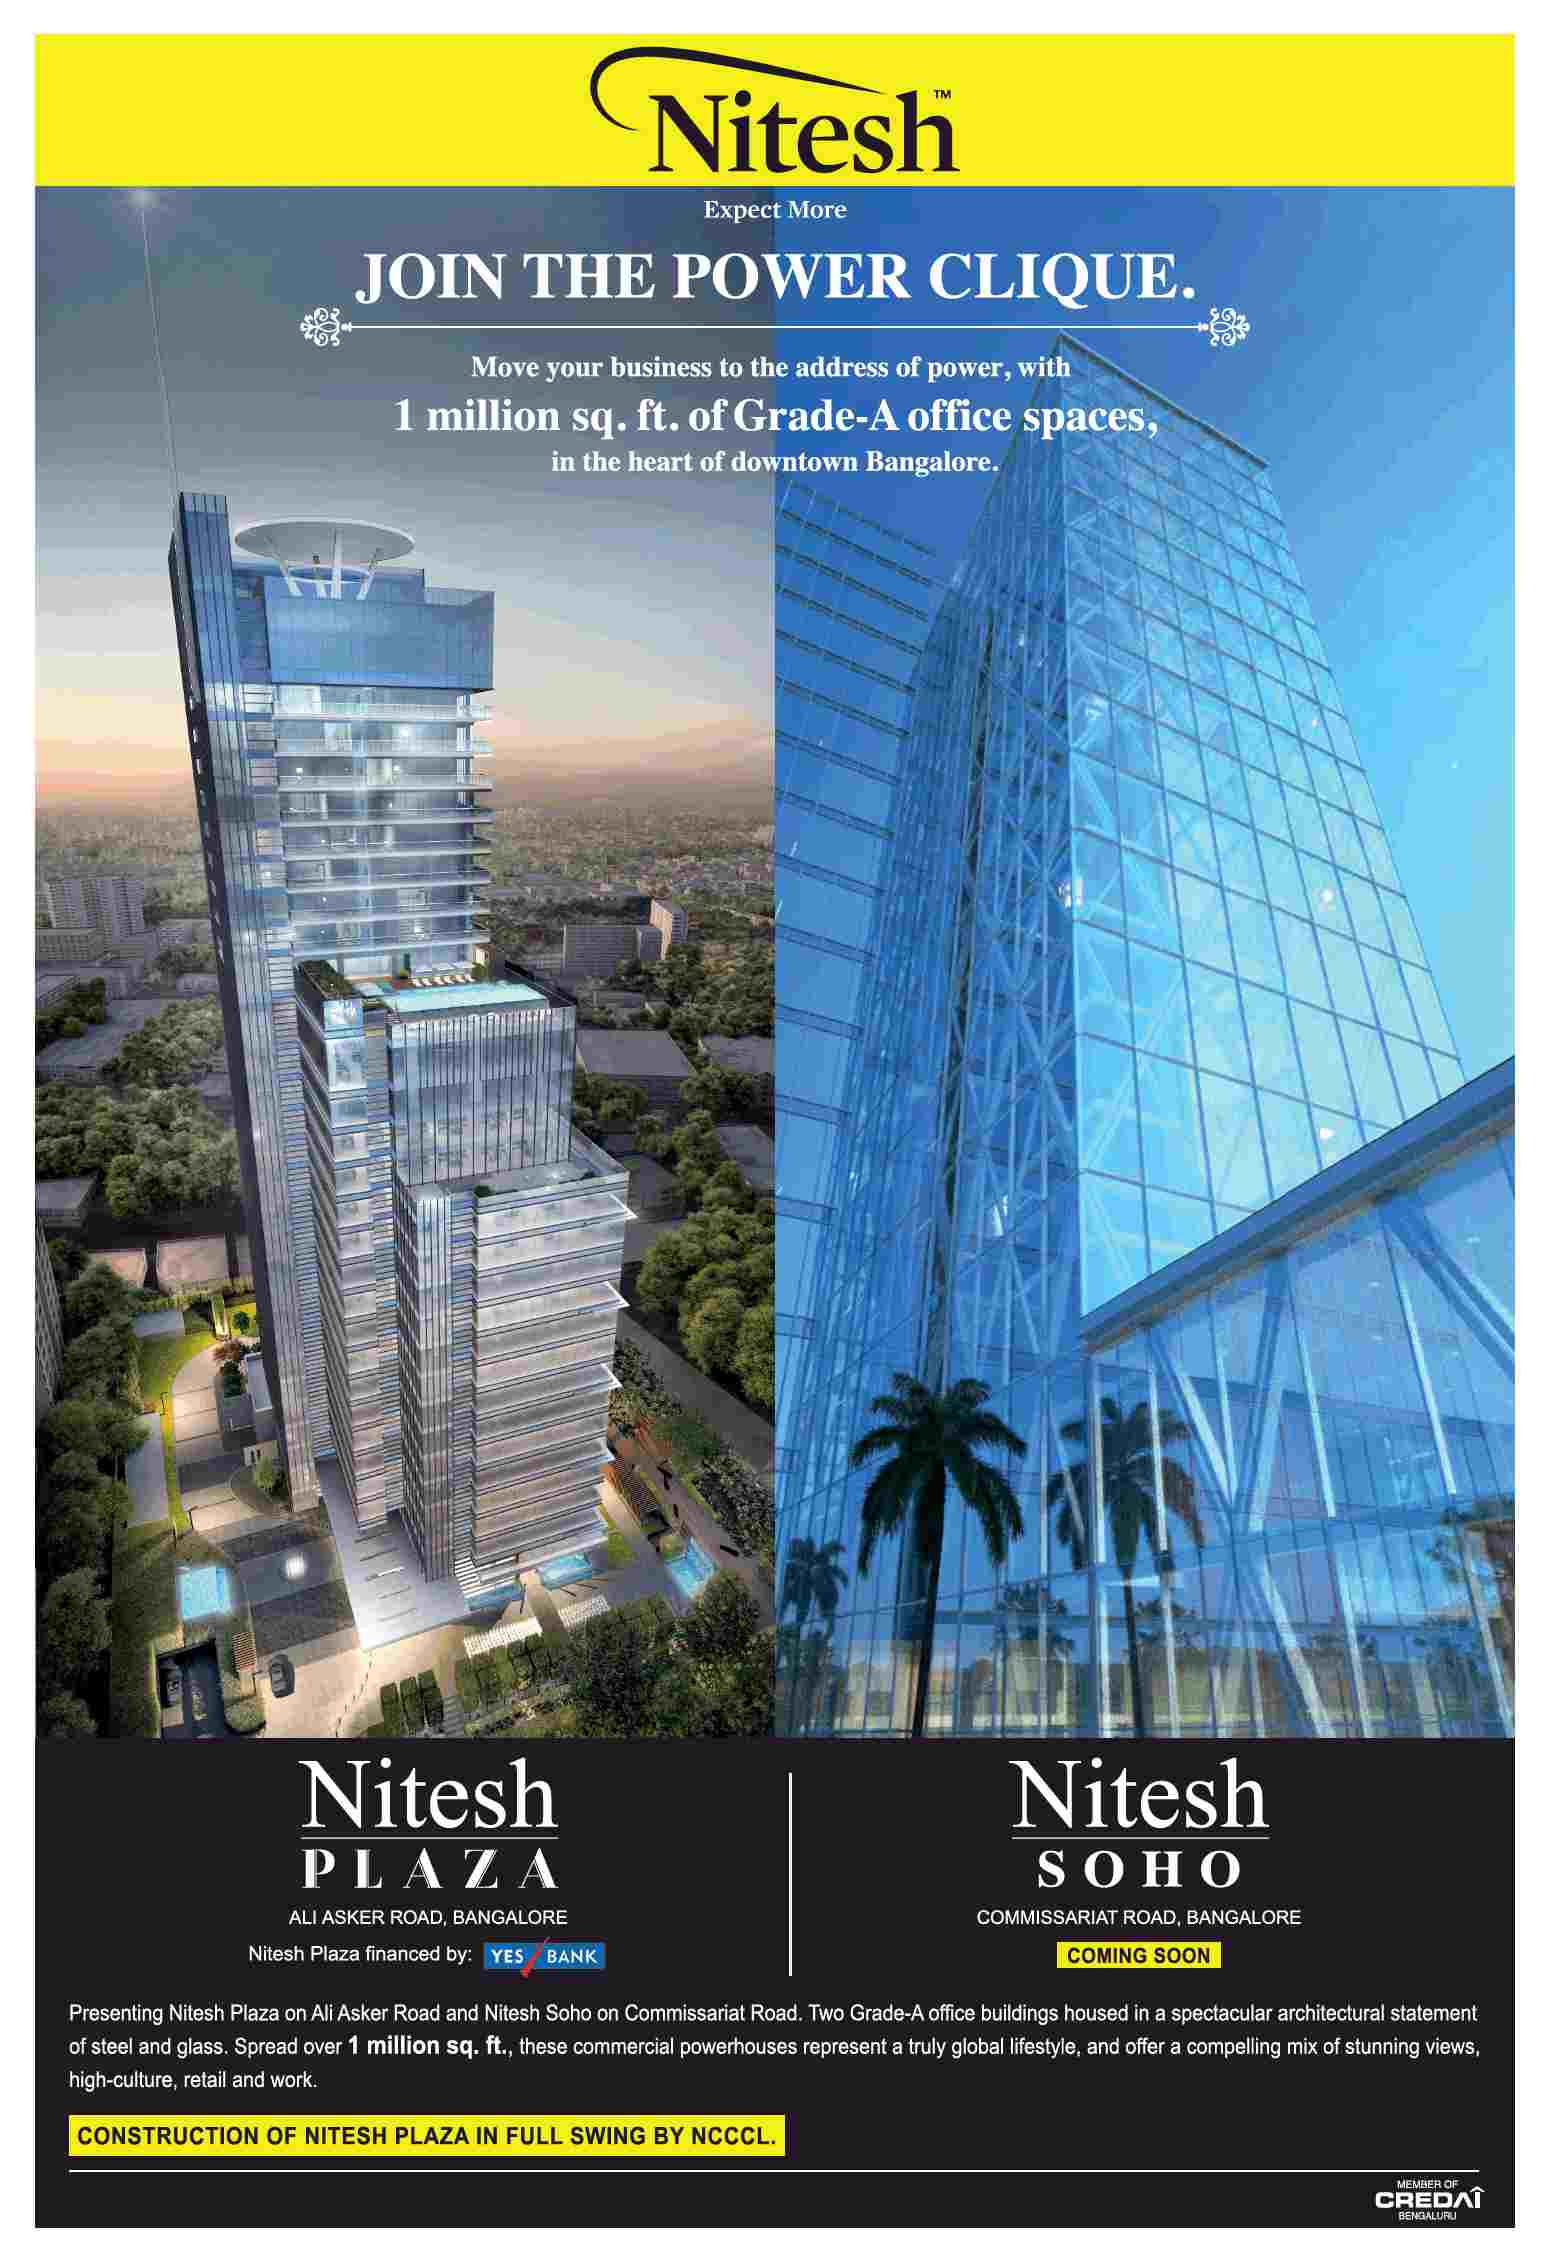 Move your business to the address of power by investing in Nitesh Projects in Bangalore